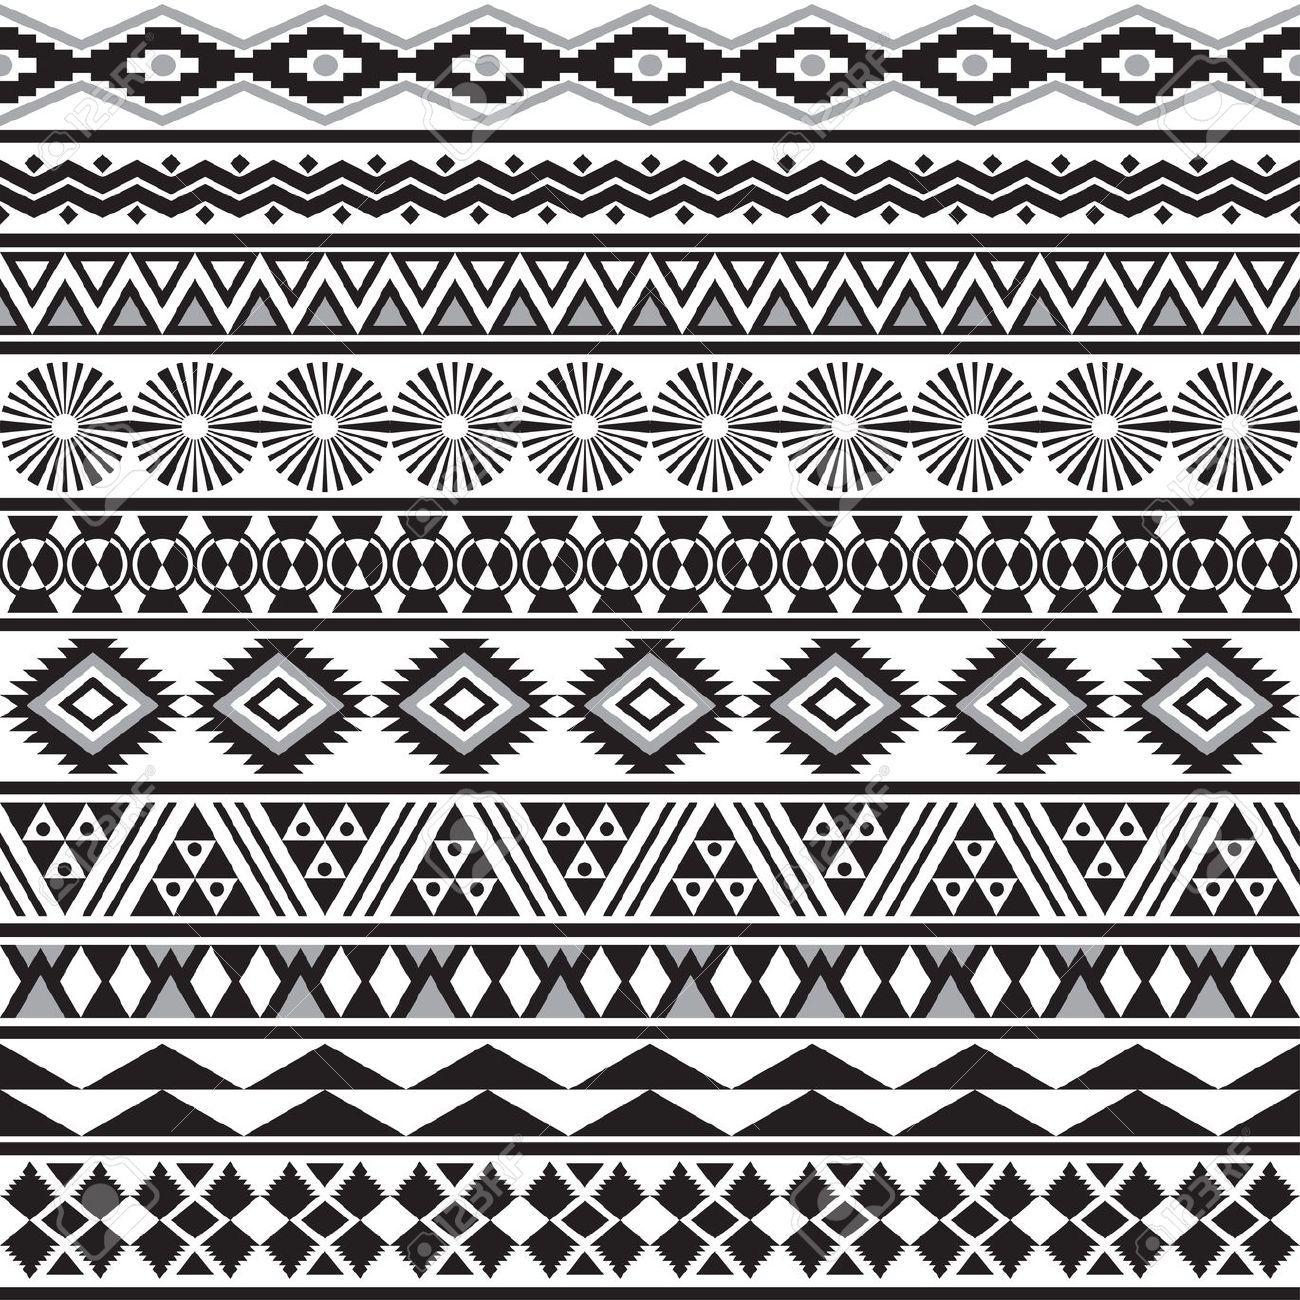 Tribal Design Wallpapers - Top Free Tribal Design Backgrounds ...